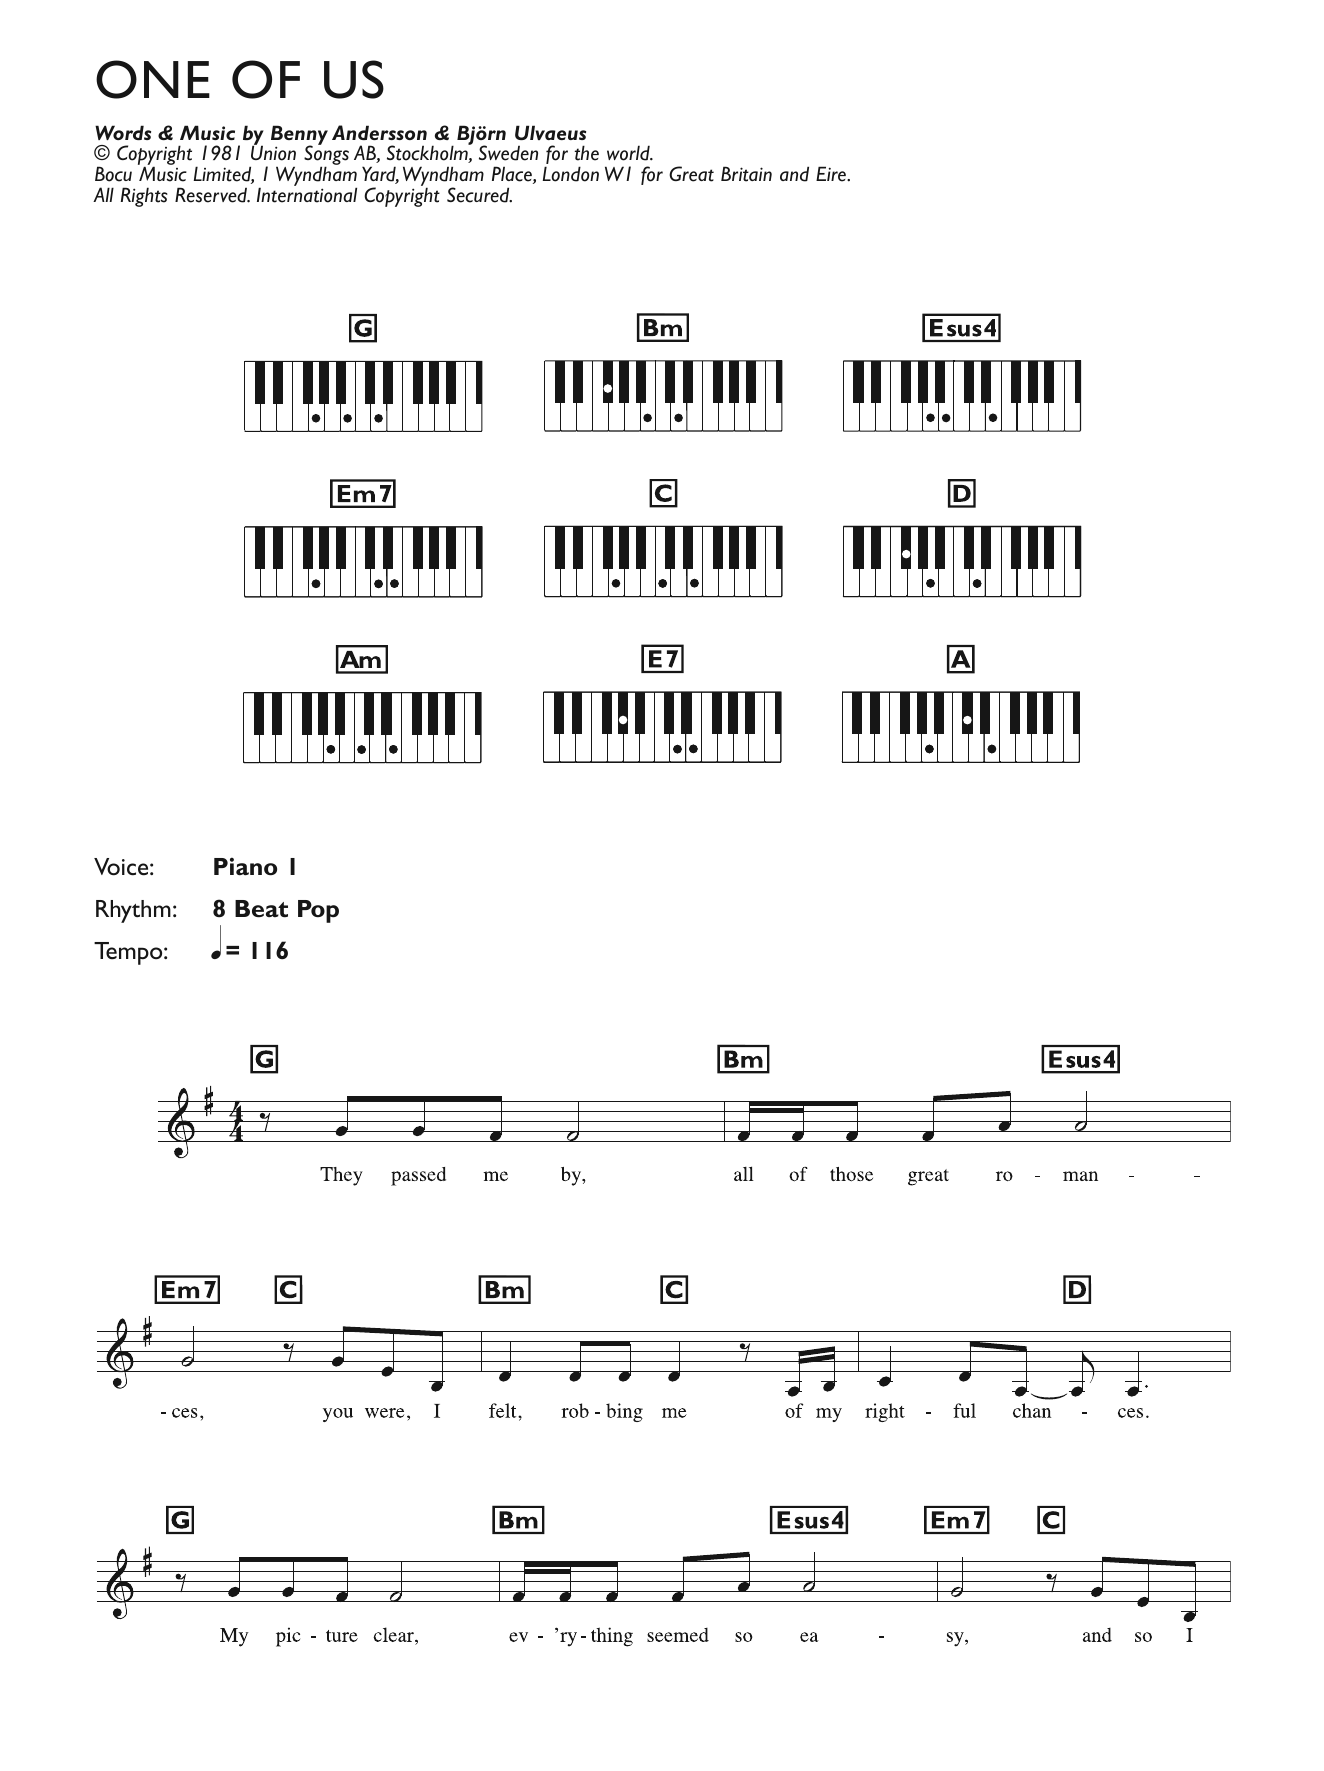 Download ABBA One Of Us Sheet Music